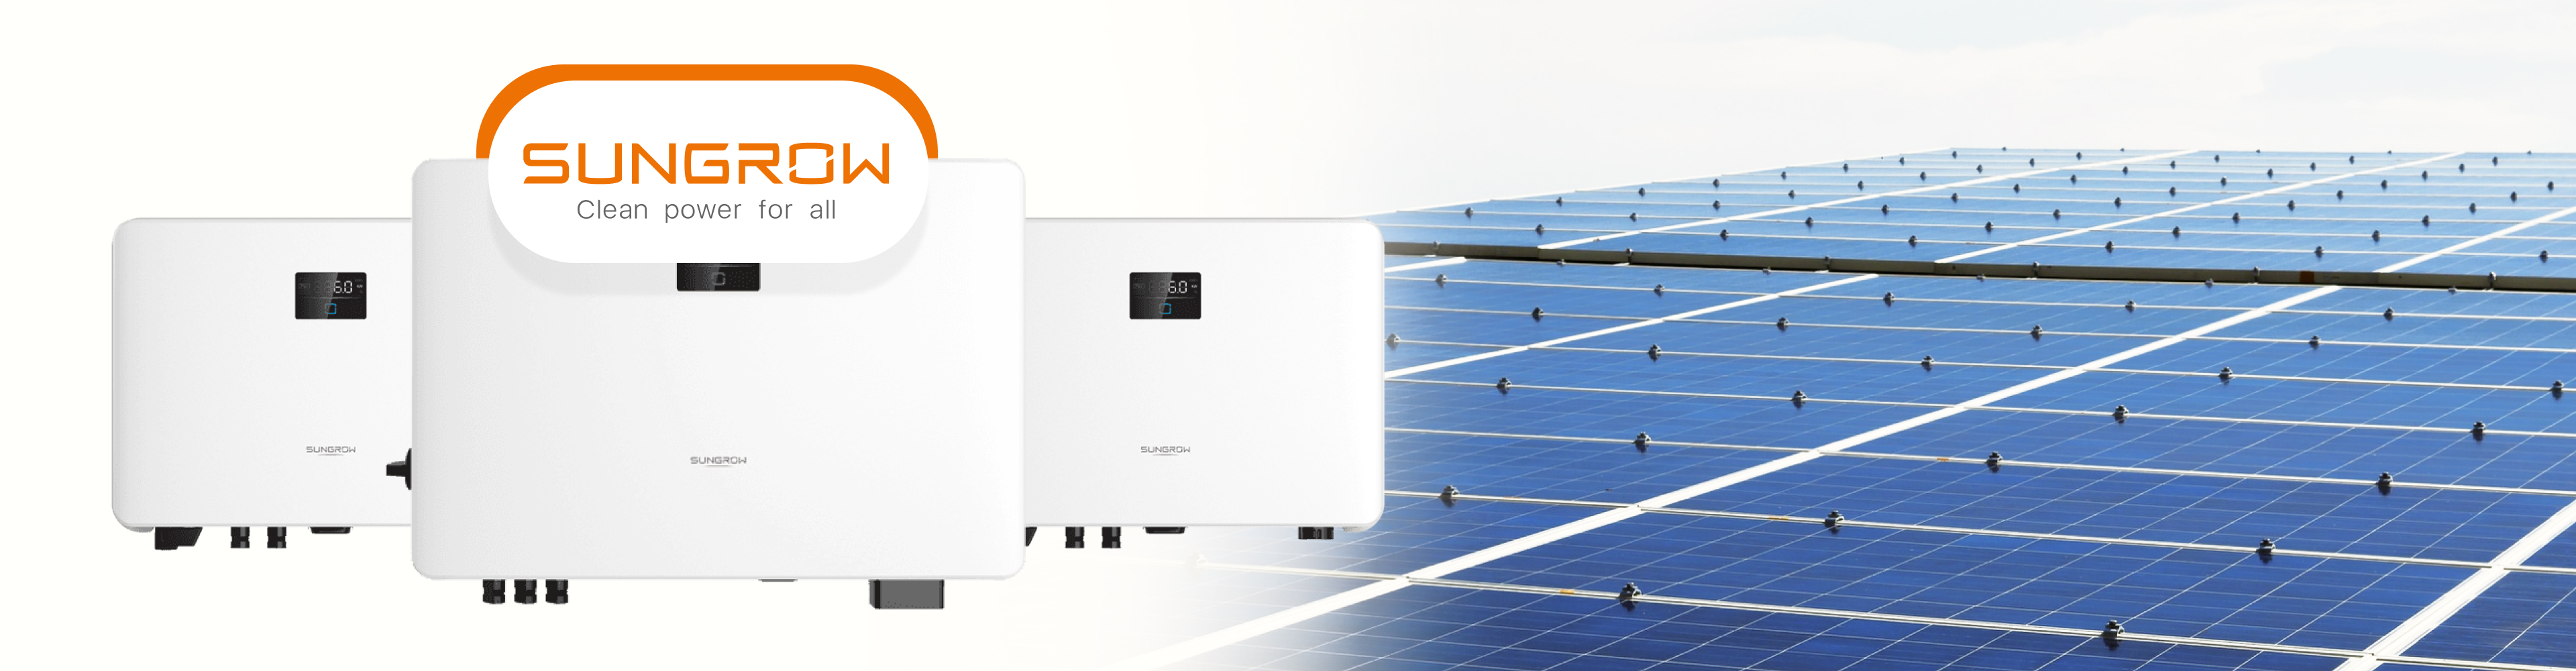 Sungrow and Arise Solar: A Perfect Pairing for maximizing benefits from your solar investment